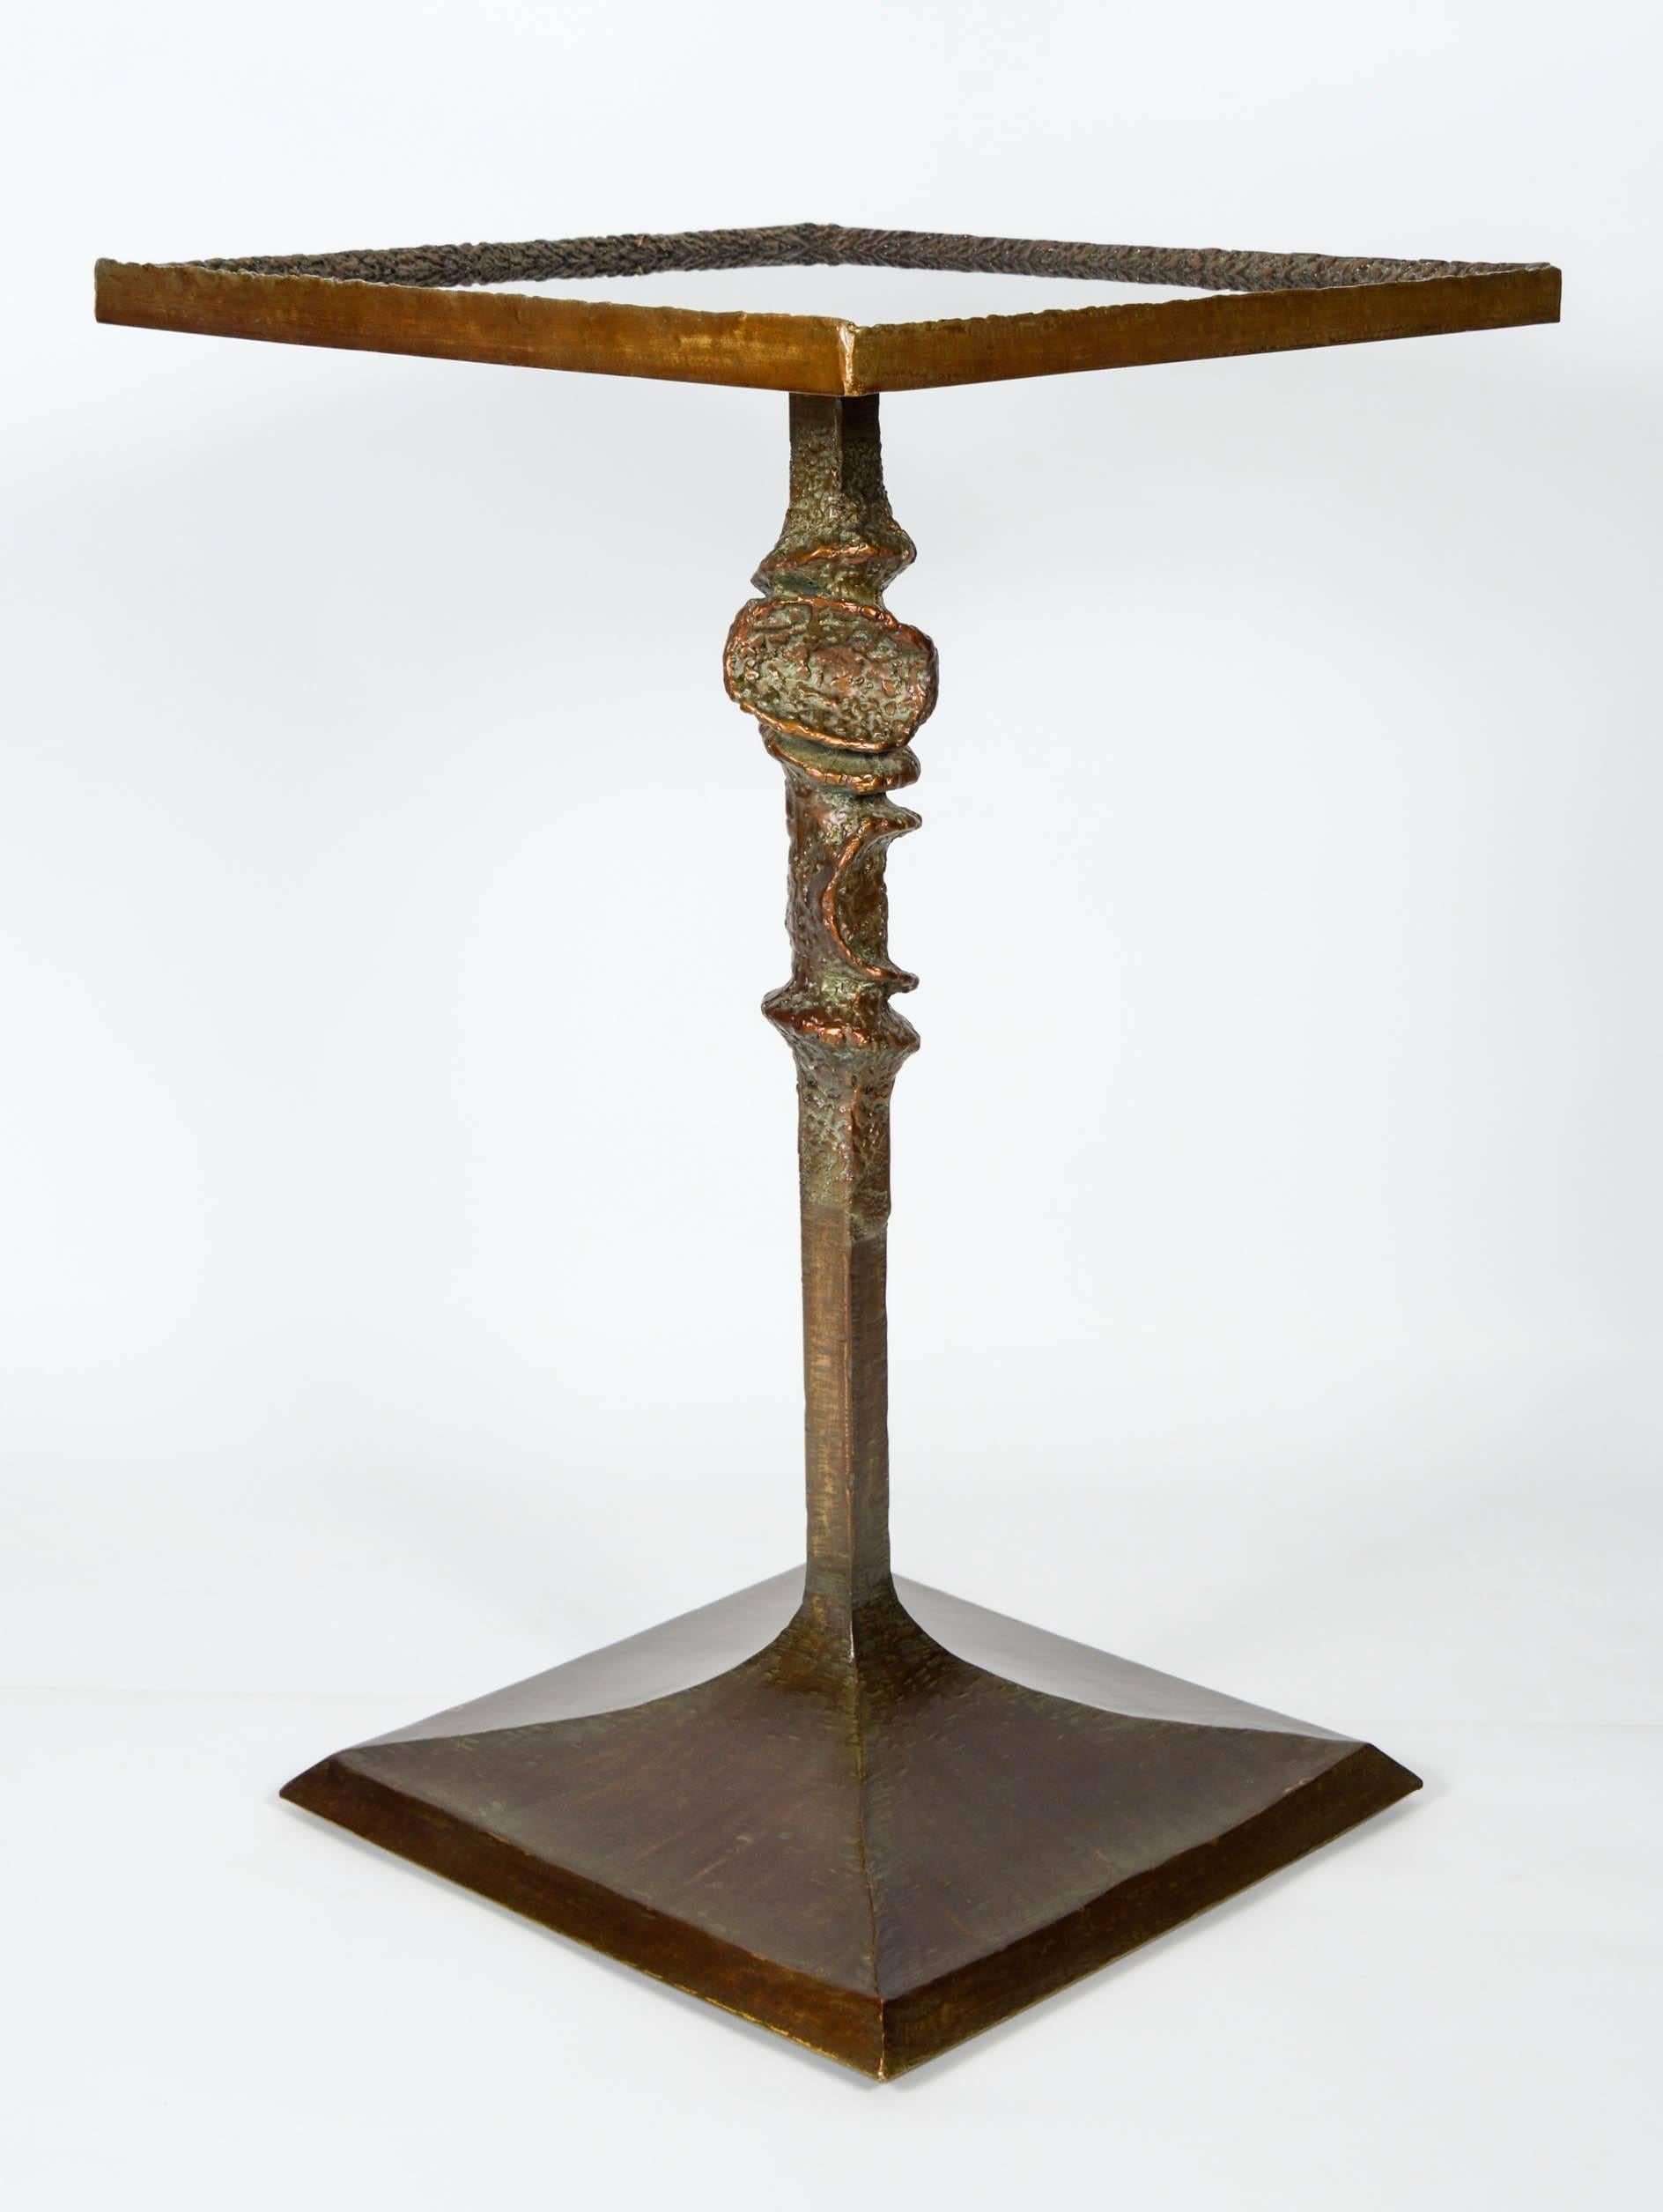 Beautiful Gueridon in the taste of Diego Giacometti, patinated metal and glass.